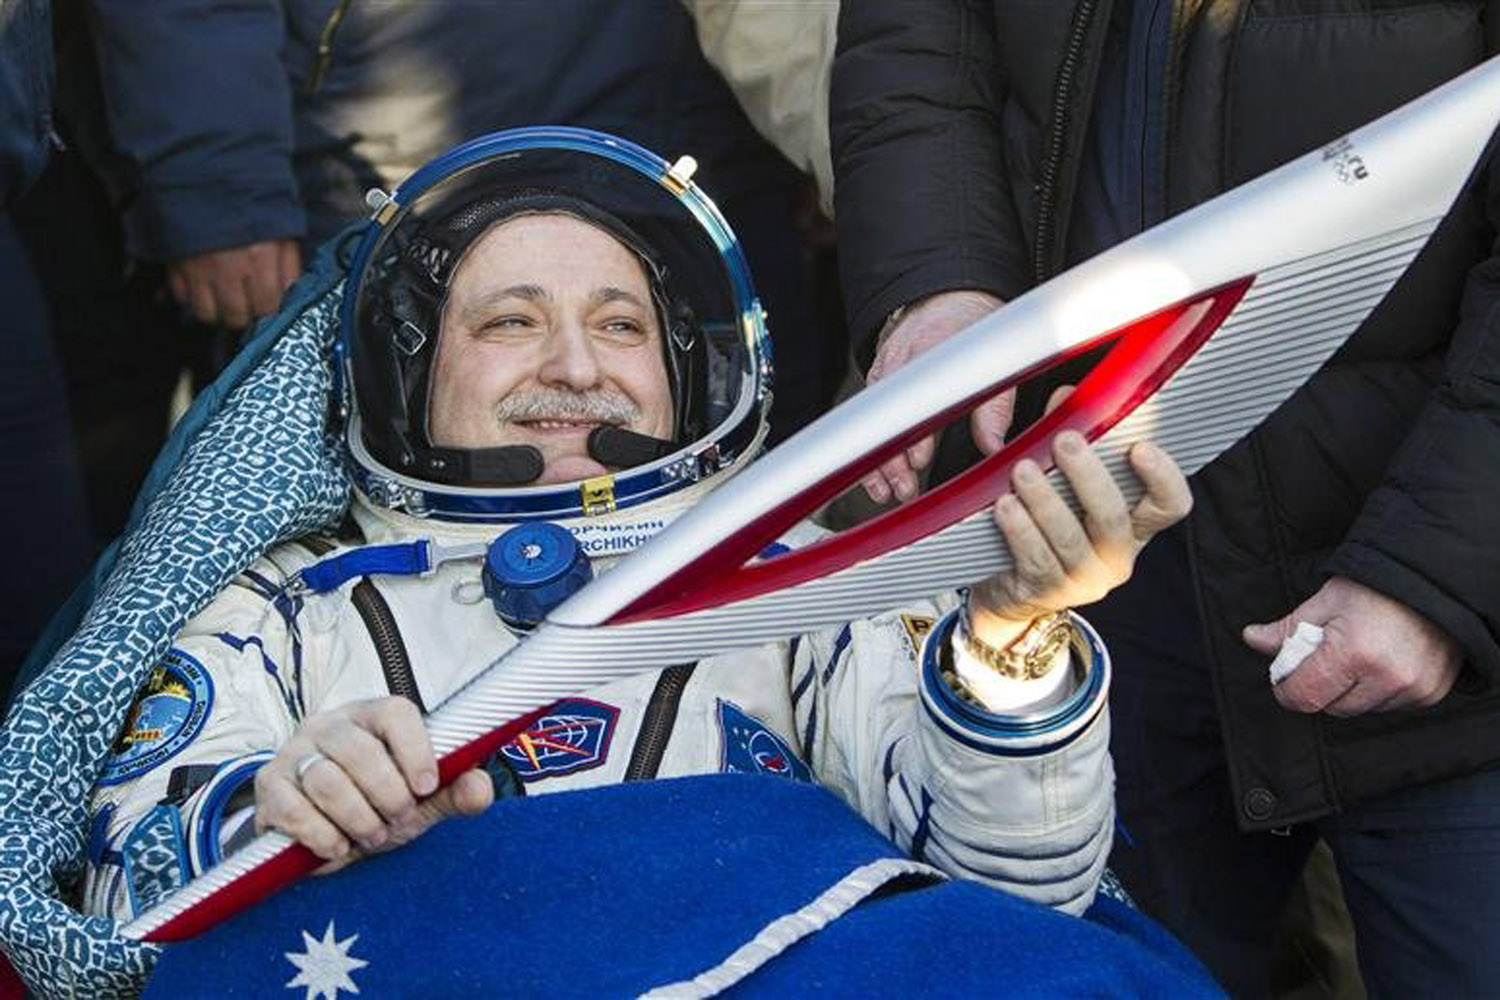 ISS crew member Russian cosmonaut Fyodor Yurchikhin holds the torch of the 2014 Sochi Winter Olympic Games after landing near the town of Zhezkazgan in central Kazakhstan